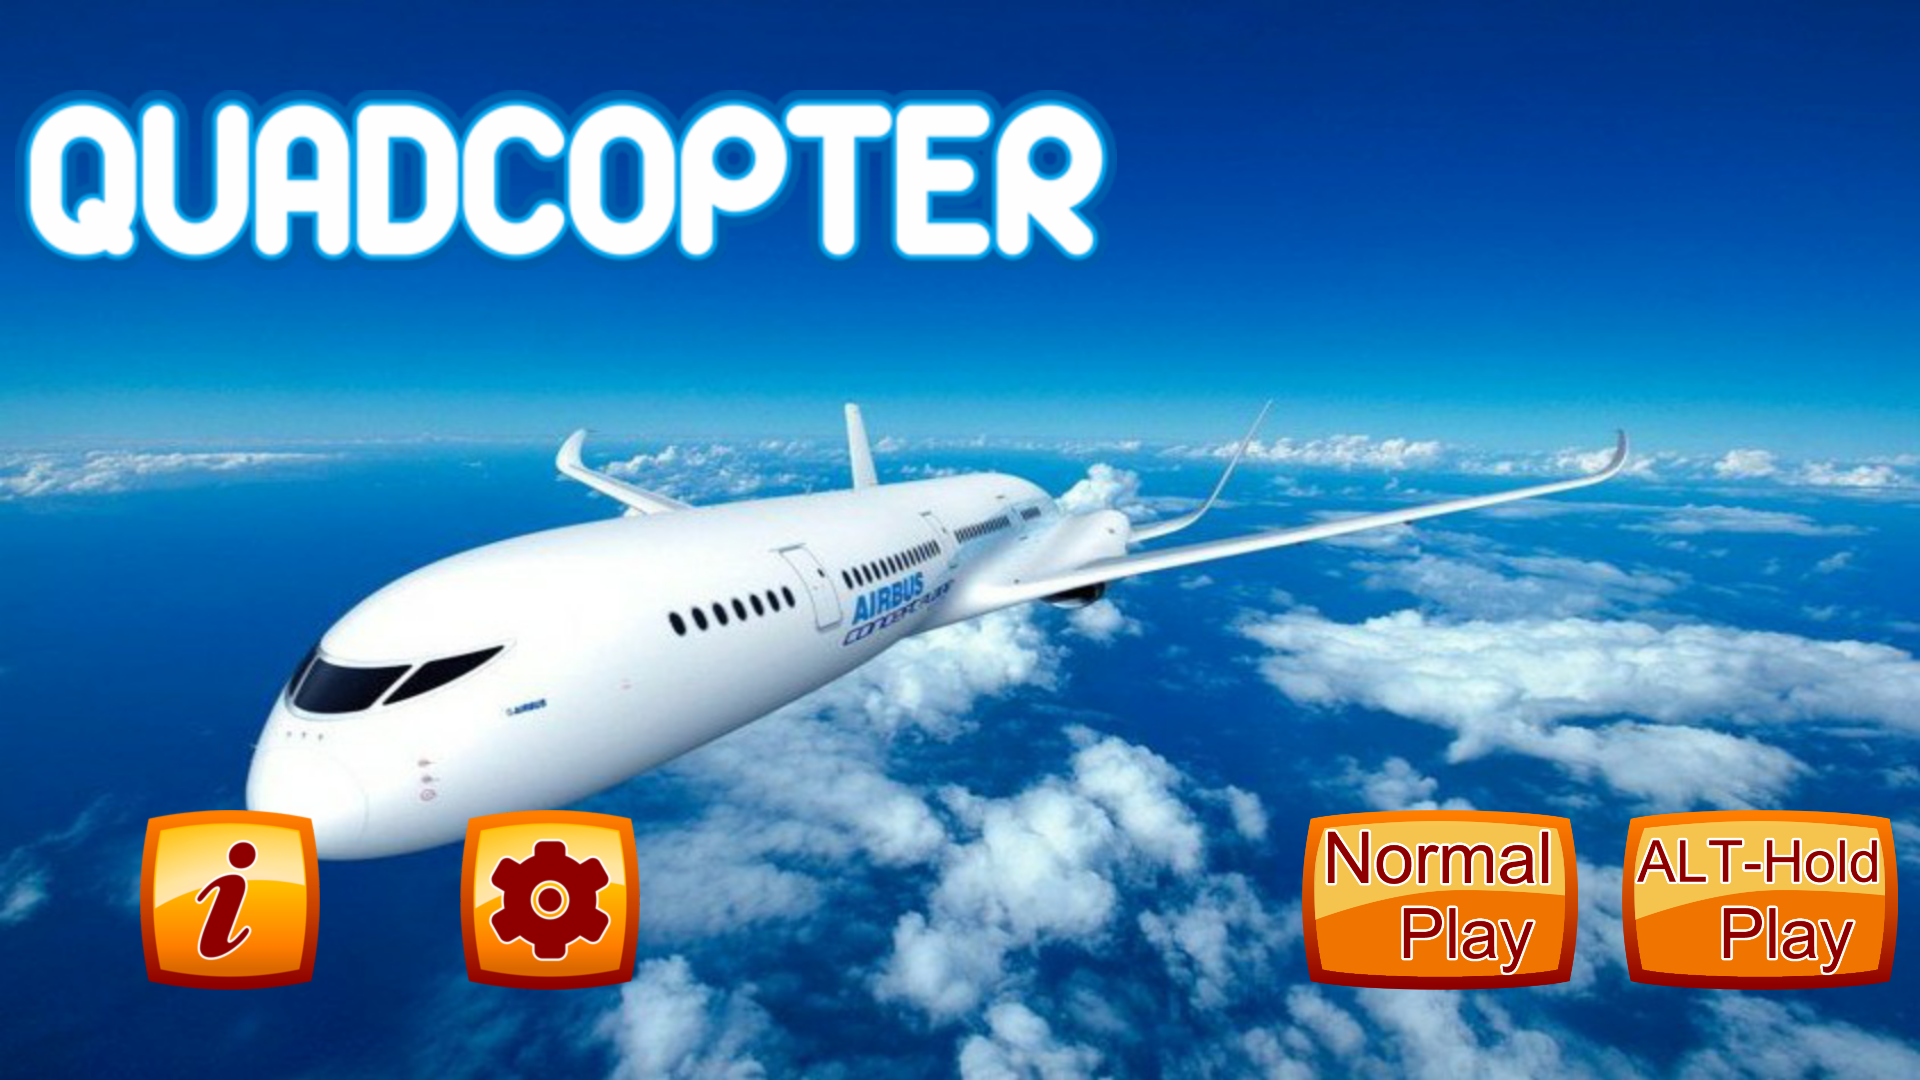 Video_Copter